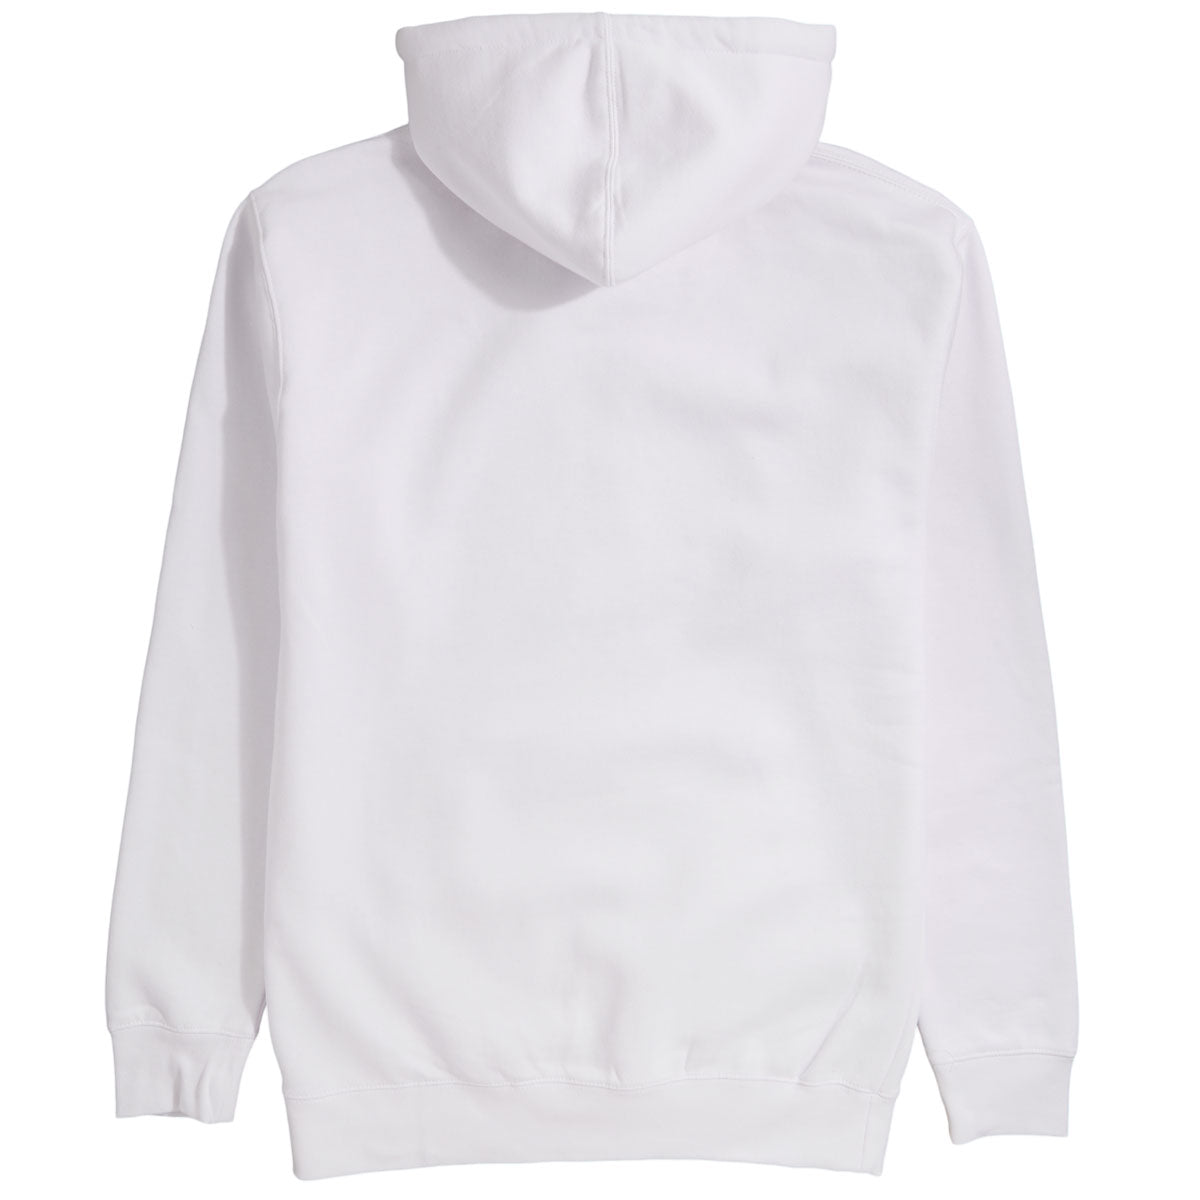 CCS Staple Pullover Hoodie - White image 4